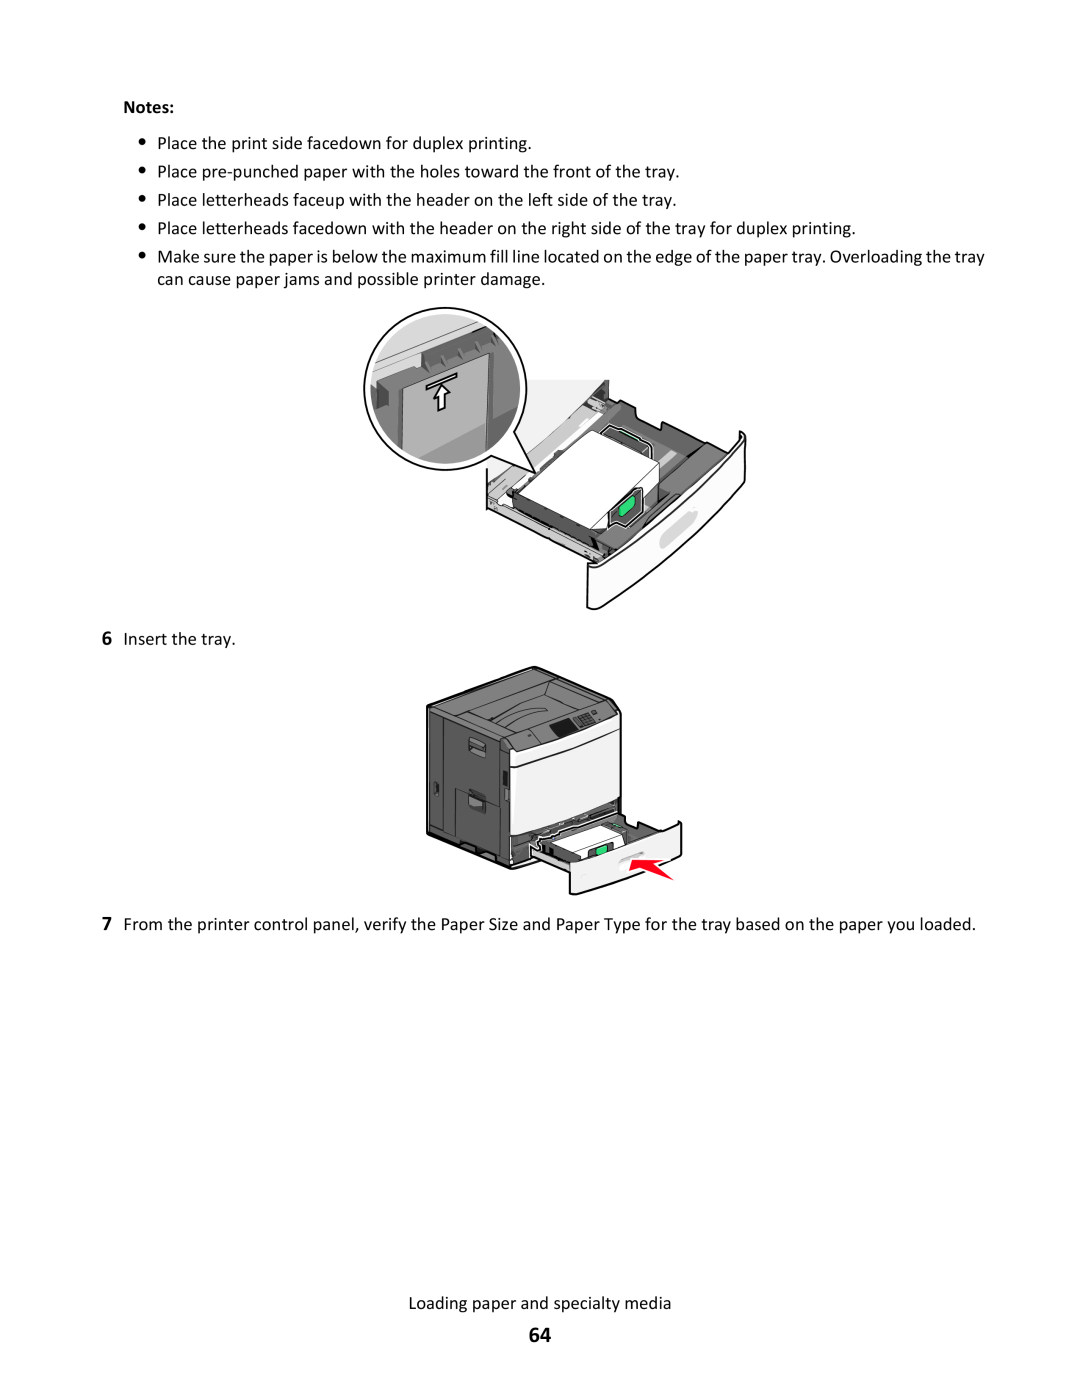 Lexmark C790 manual Place the print side facedown for duplex printing, Insert the tray, Loading paper and specialty media 